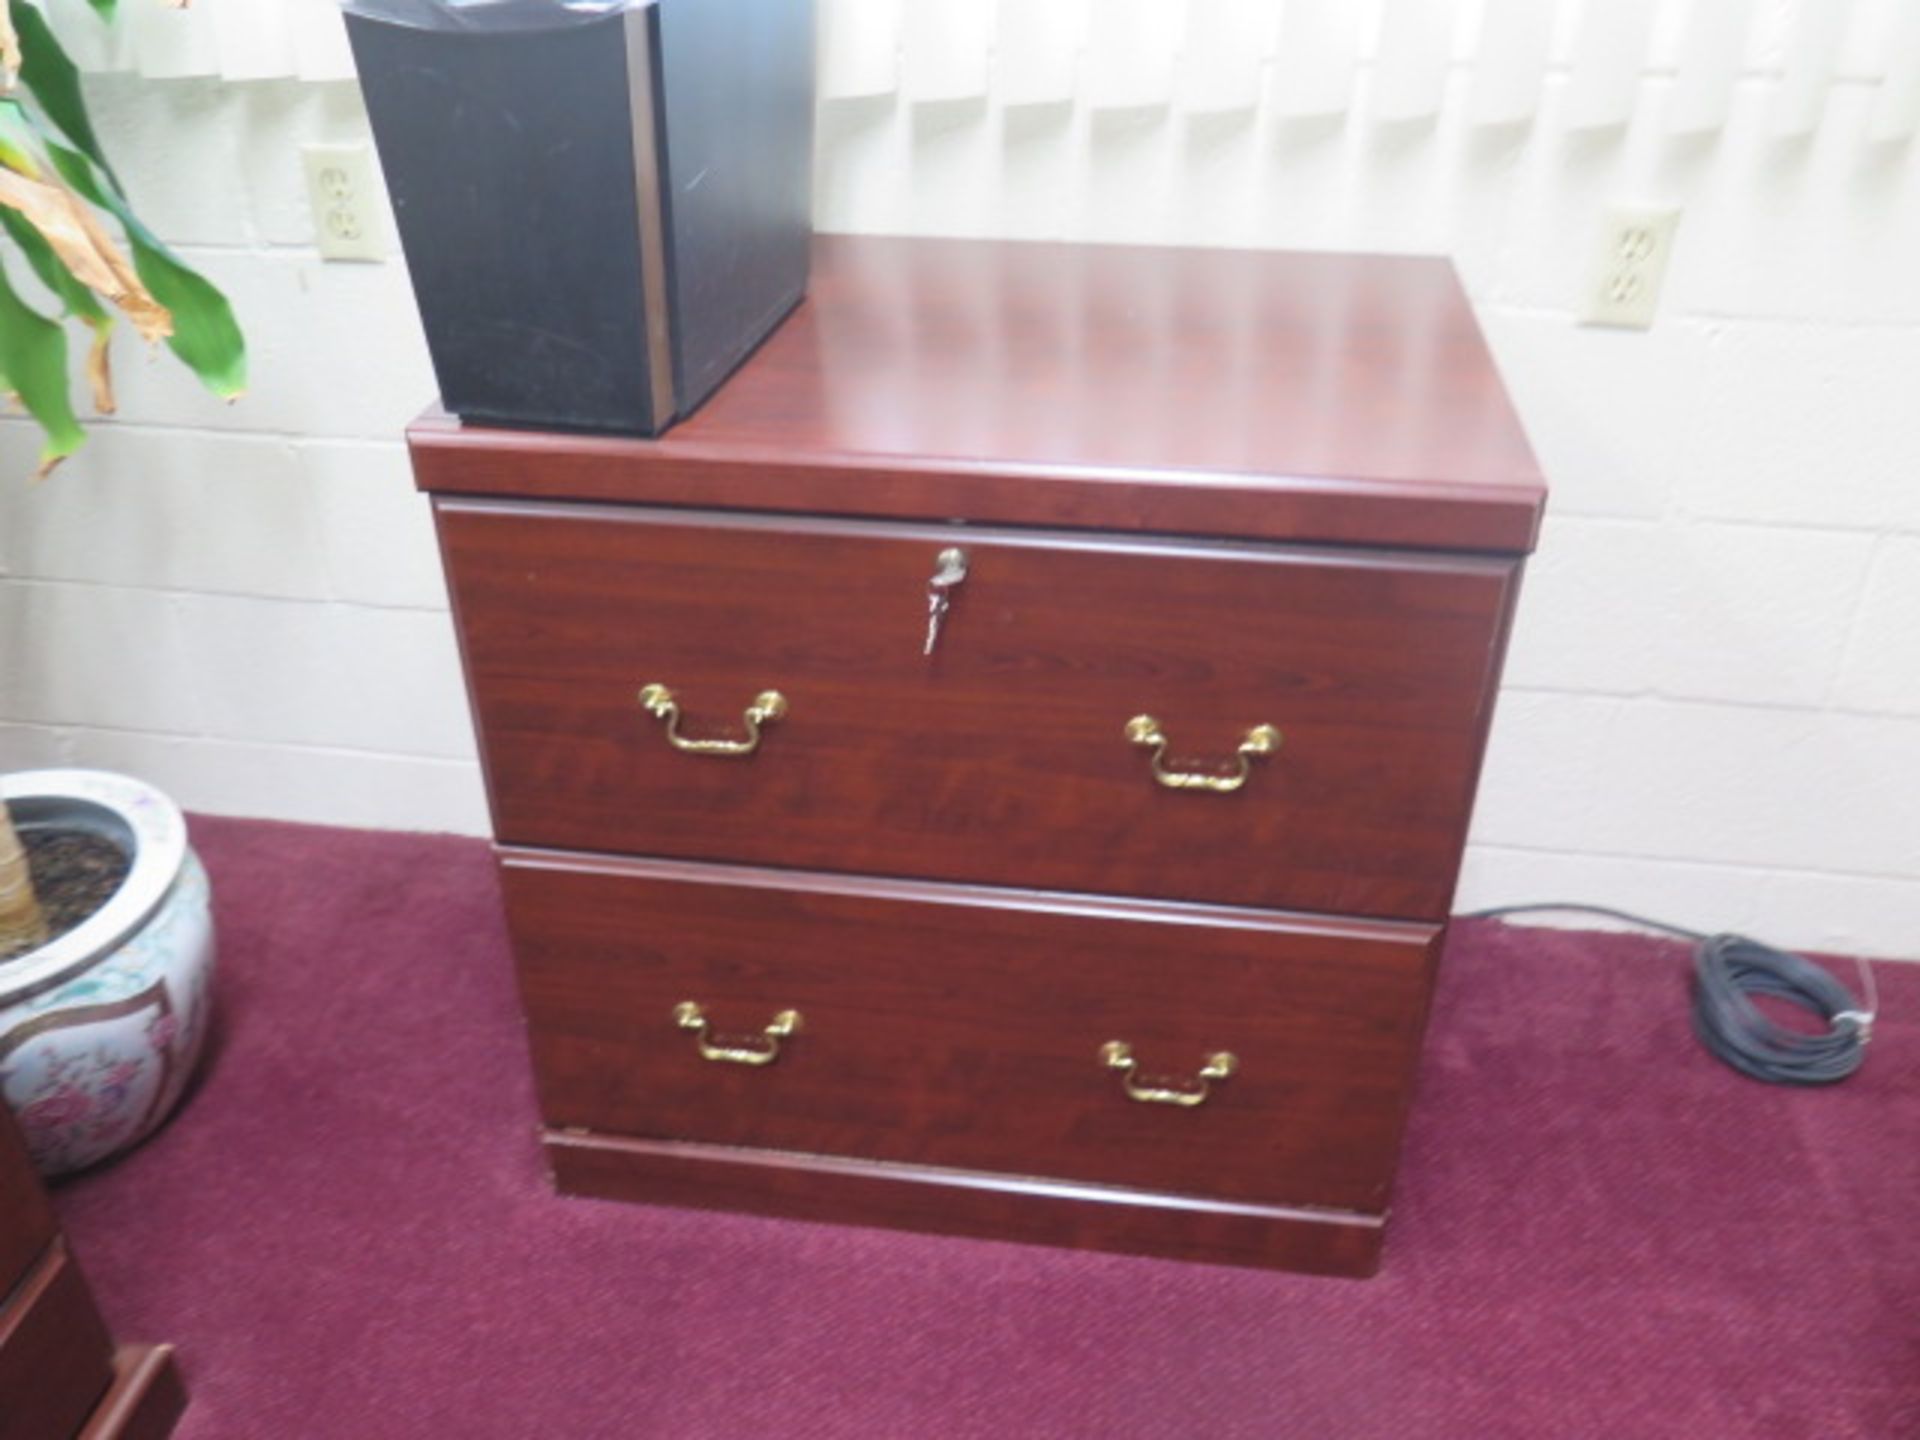 Execitive Desk, Credenza, Cabinet and File Cabinet (SOLD AS-IS - NO WARRANTY) - Image 5 of 5